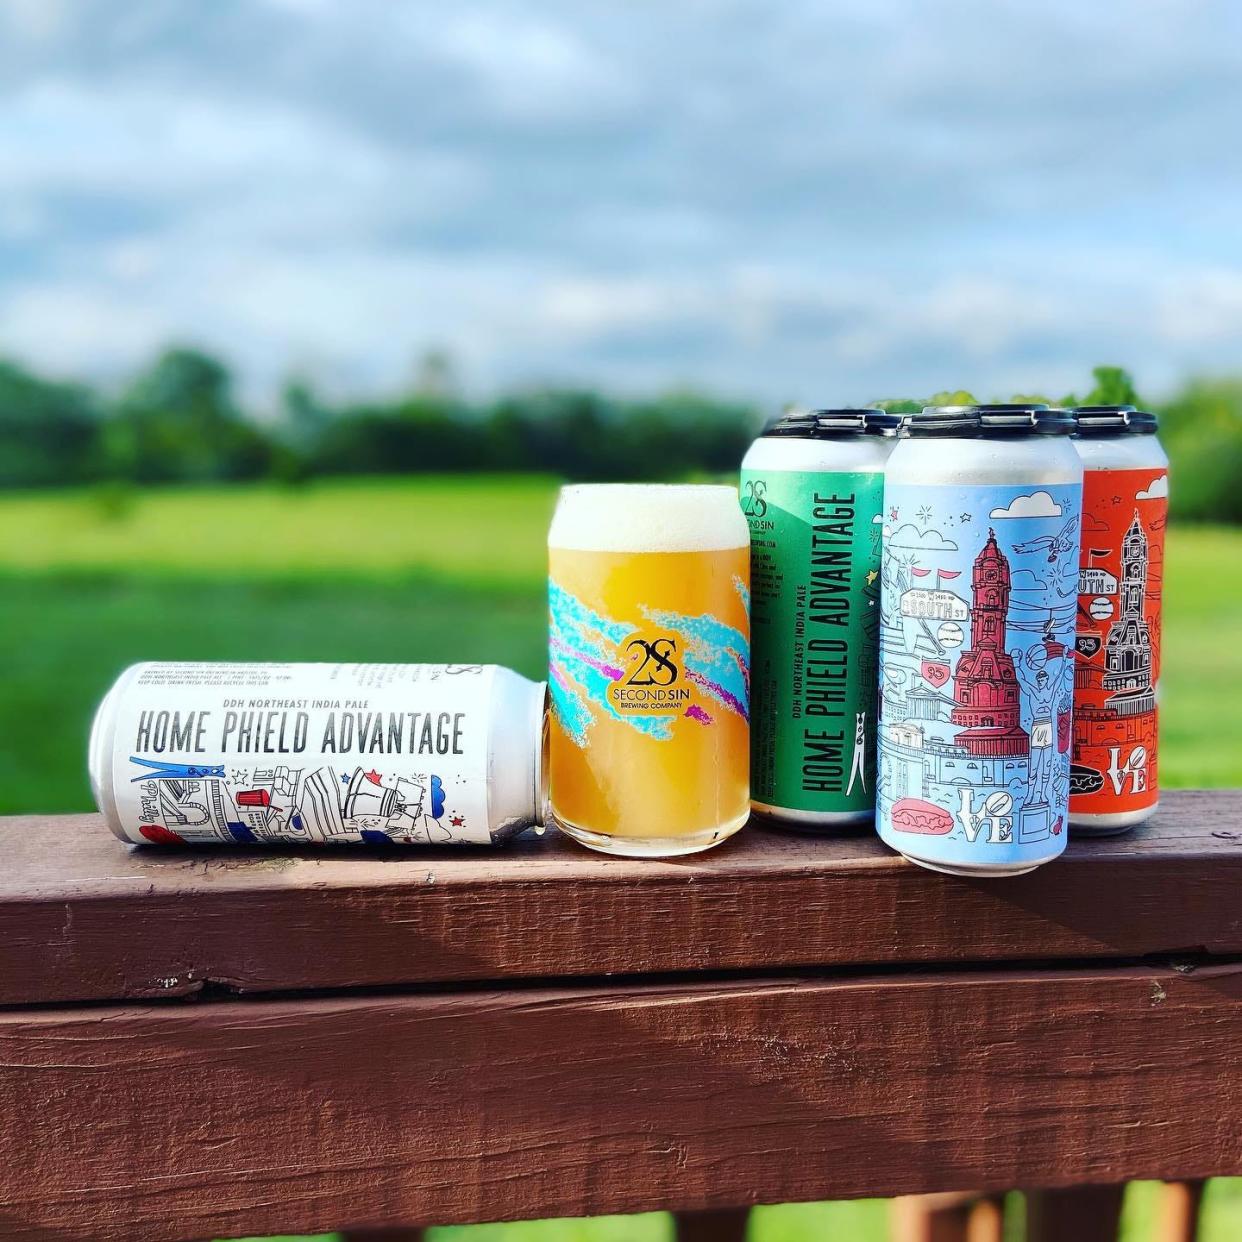 Second Sin Brewing Company offers a variety of craft beers styles, including Home Phield Advantage, a double dry-hopped hazy IPA.